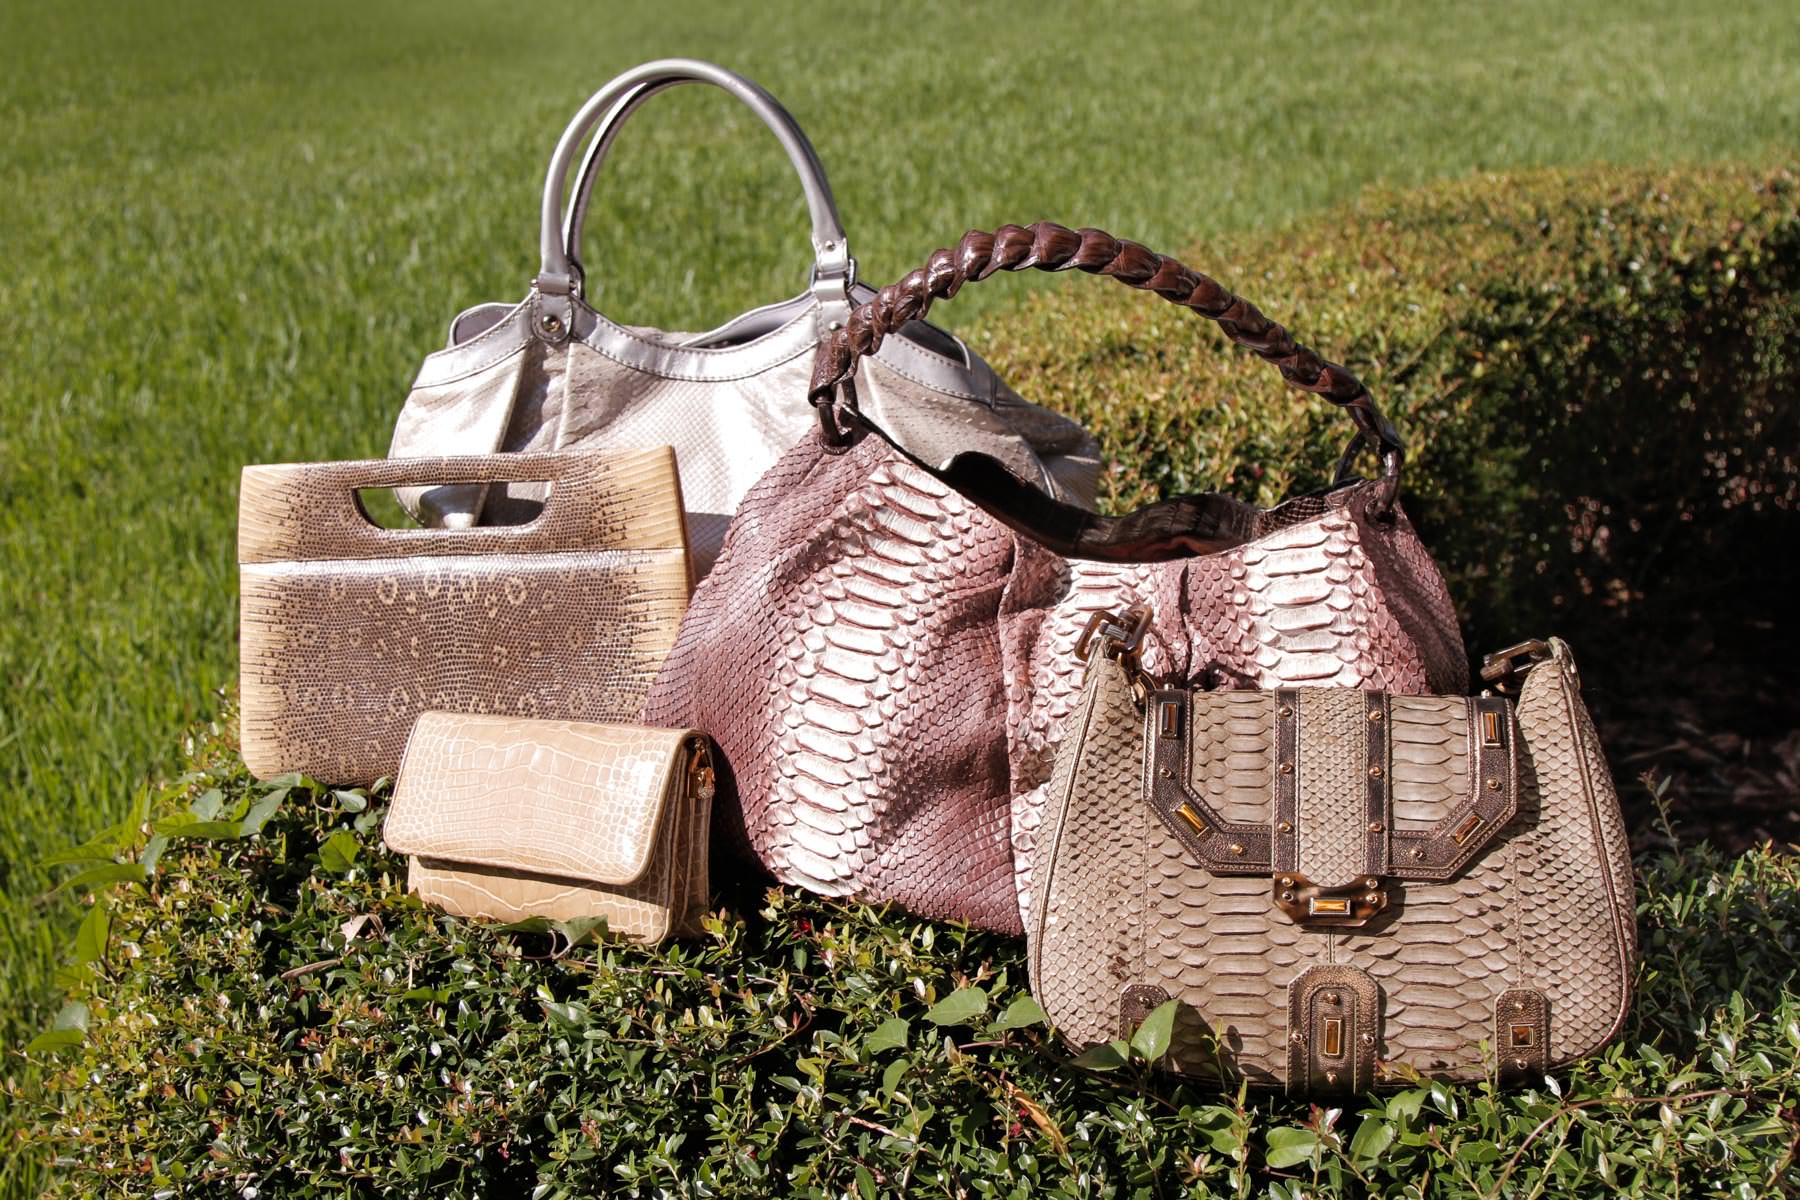 5 Things to Consider Before You Buy Your First Exotic Leather Handbag